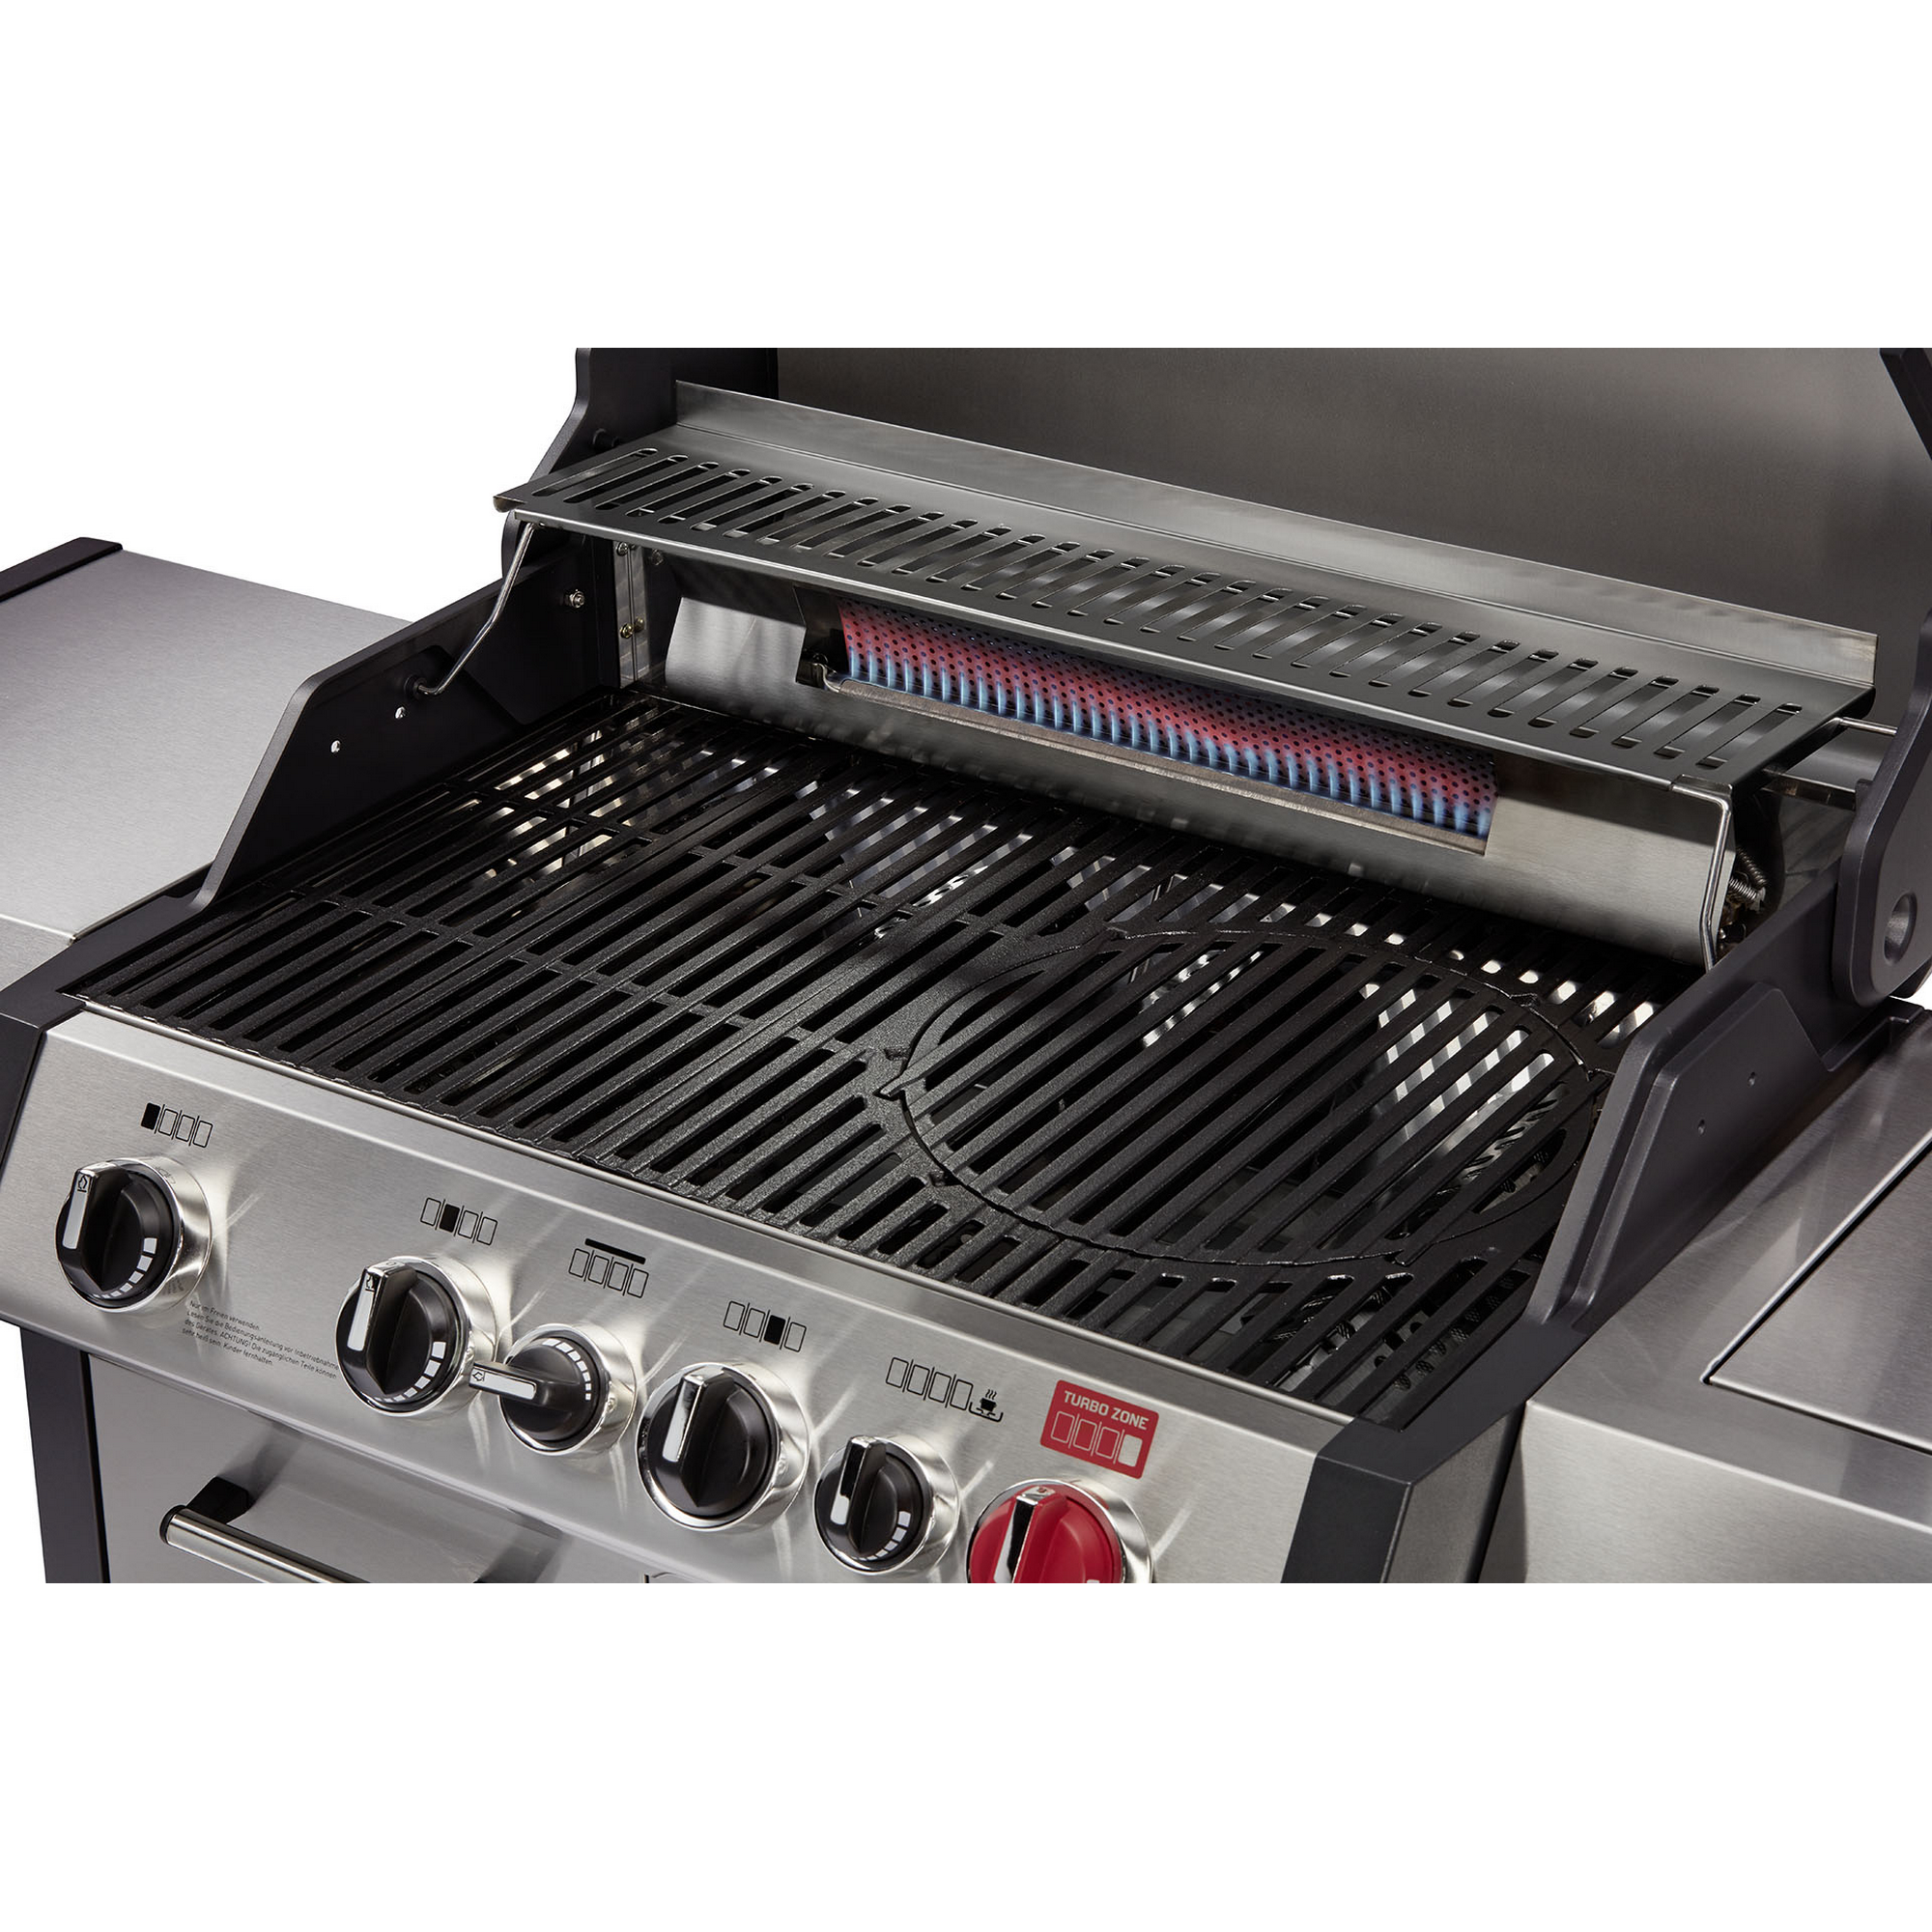 Gasgrill 'Monroe Pro 4 SIK Turbo' 4 Brenner 153,5 x 58 x 118,5 cm + product picture